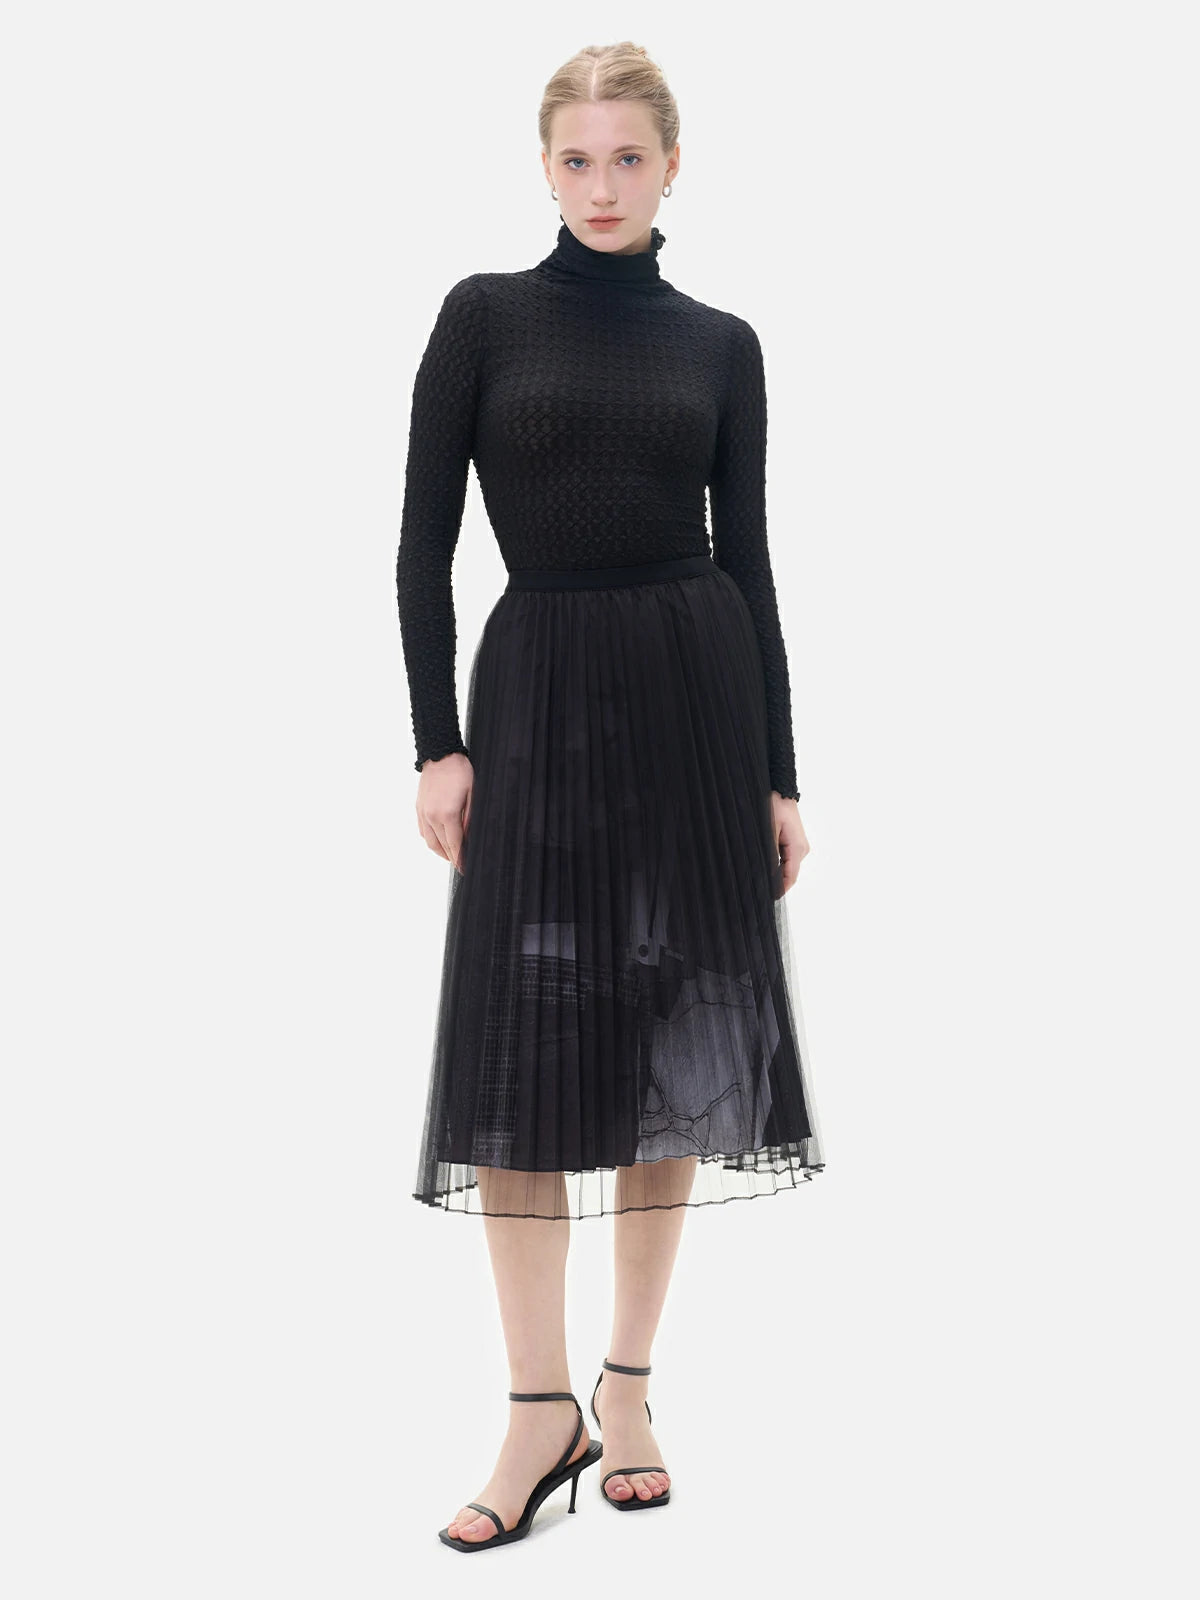 This double-layered skirt, boasts a pleated inner lining, a stylish black and white printed pattern, and a structured silhouette.